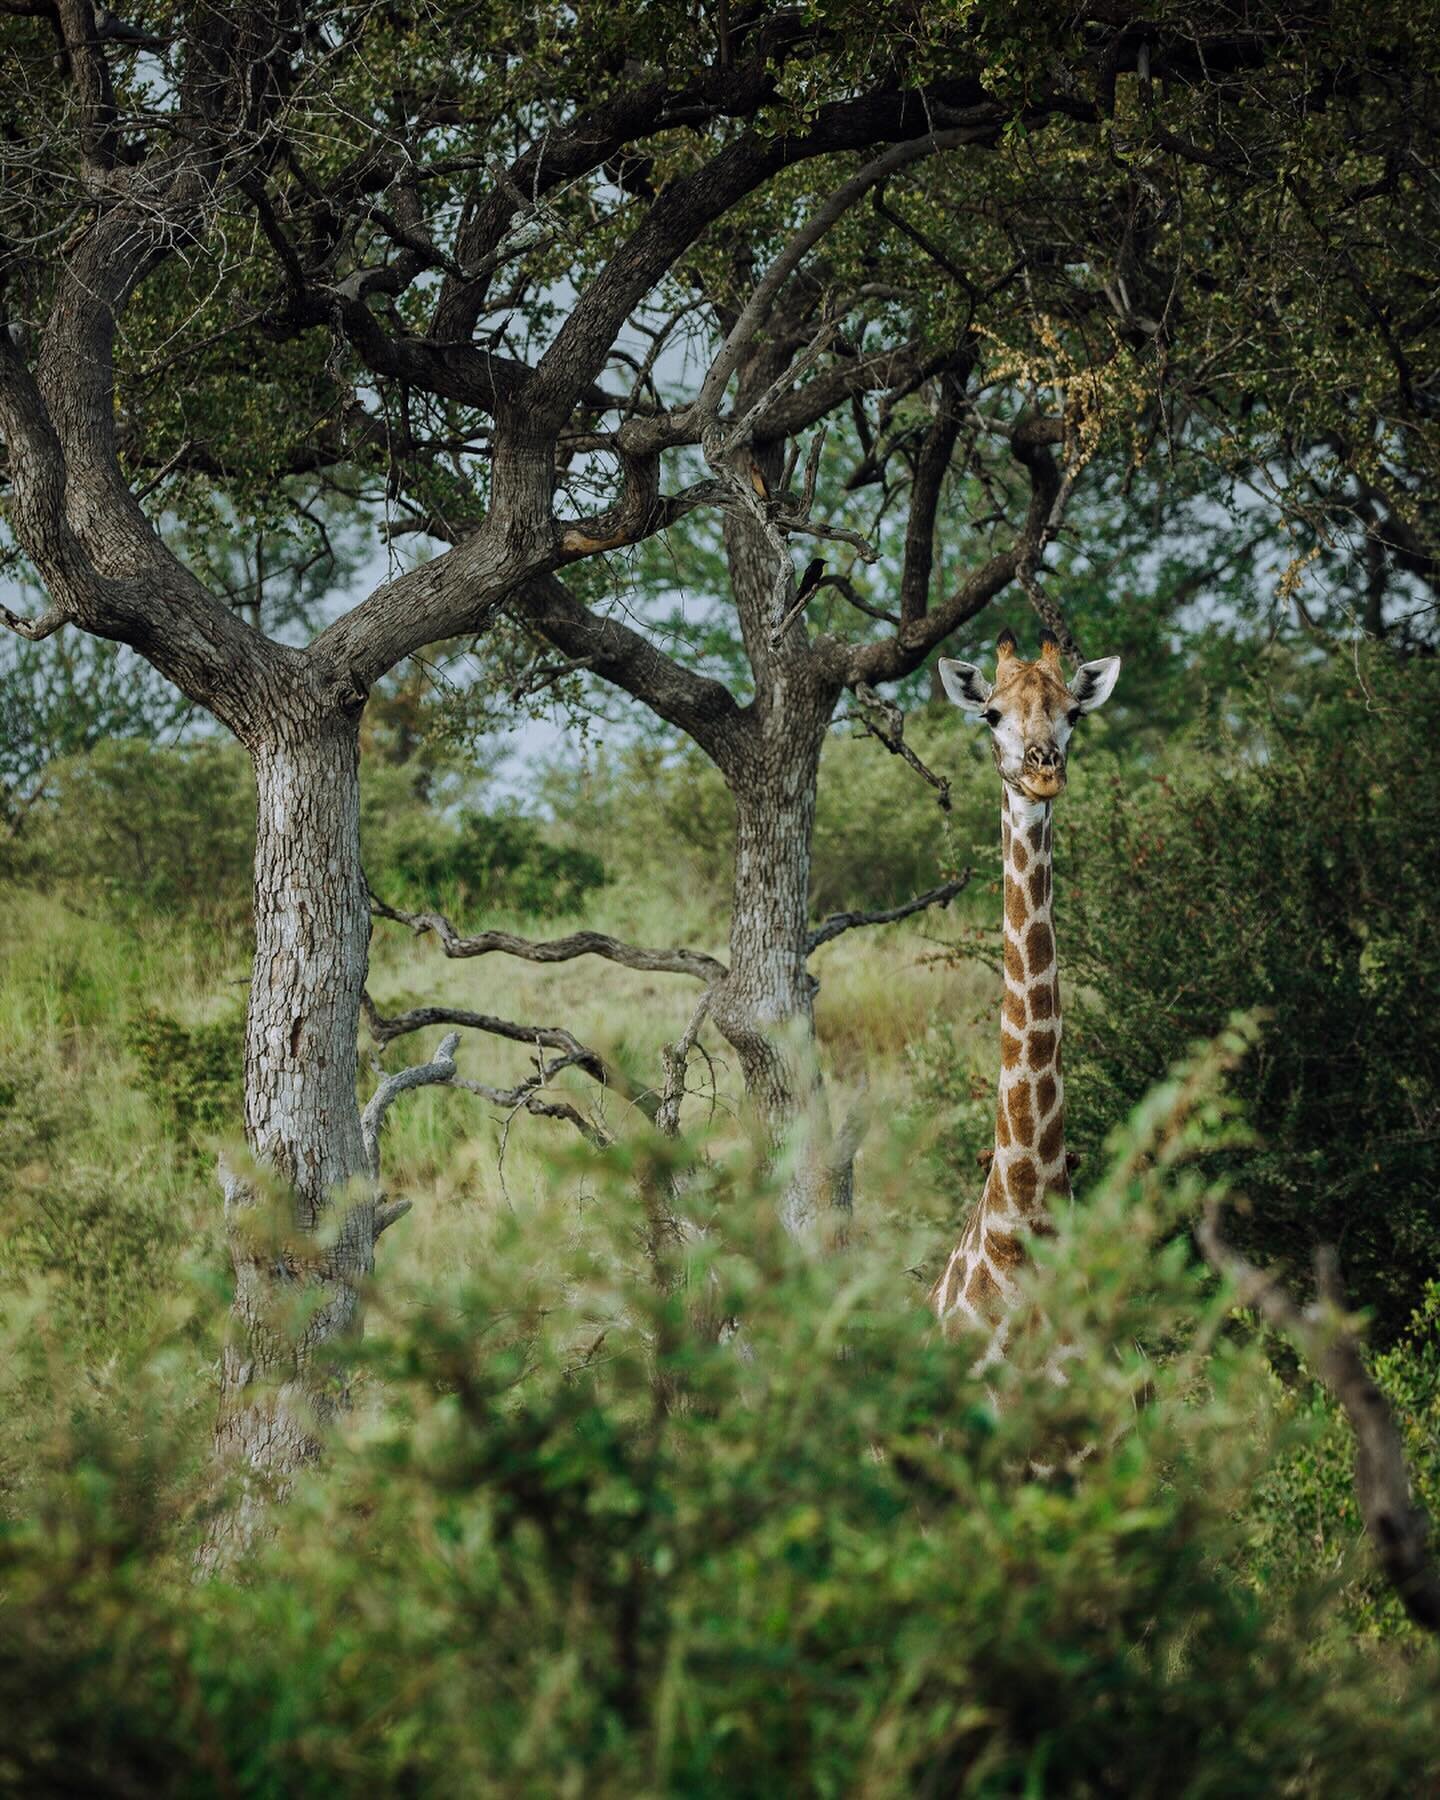 Did you know giraffes have the same number of neck vertebrae as humans? Despite their incredibly long necks, giraffes have only seven neck vertebrae, just like humans. However, each of their neck bones can be up to 10 inches long, allowing them to re